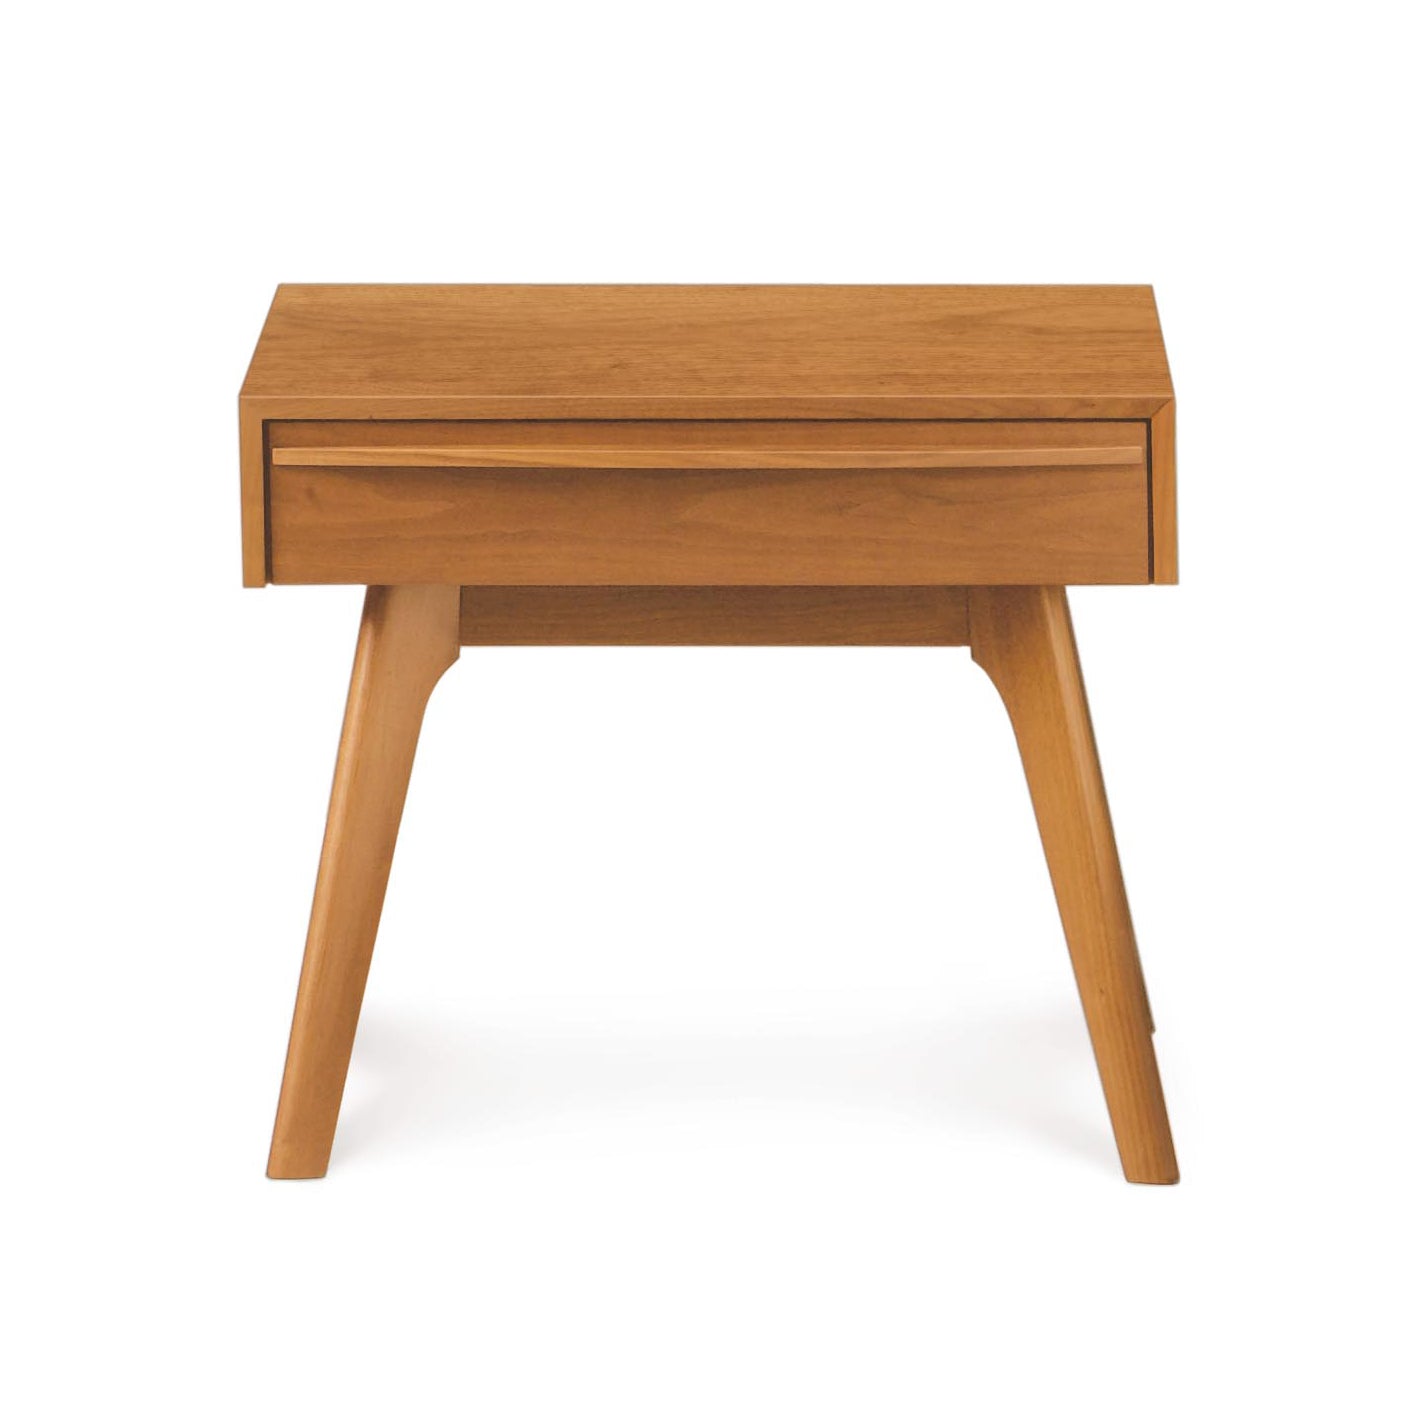 Catalina 1-Drawer Nightstand: Solid wood nightstand with a single drawer, featuring angled legs, isolated on a white background. Brand: Copeland Furniture.